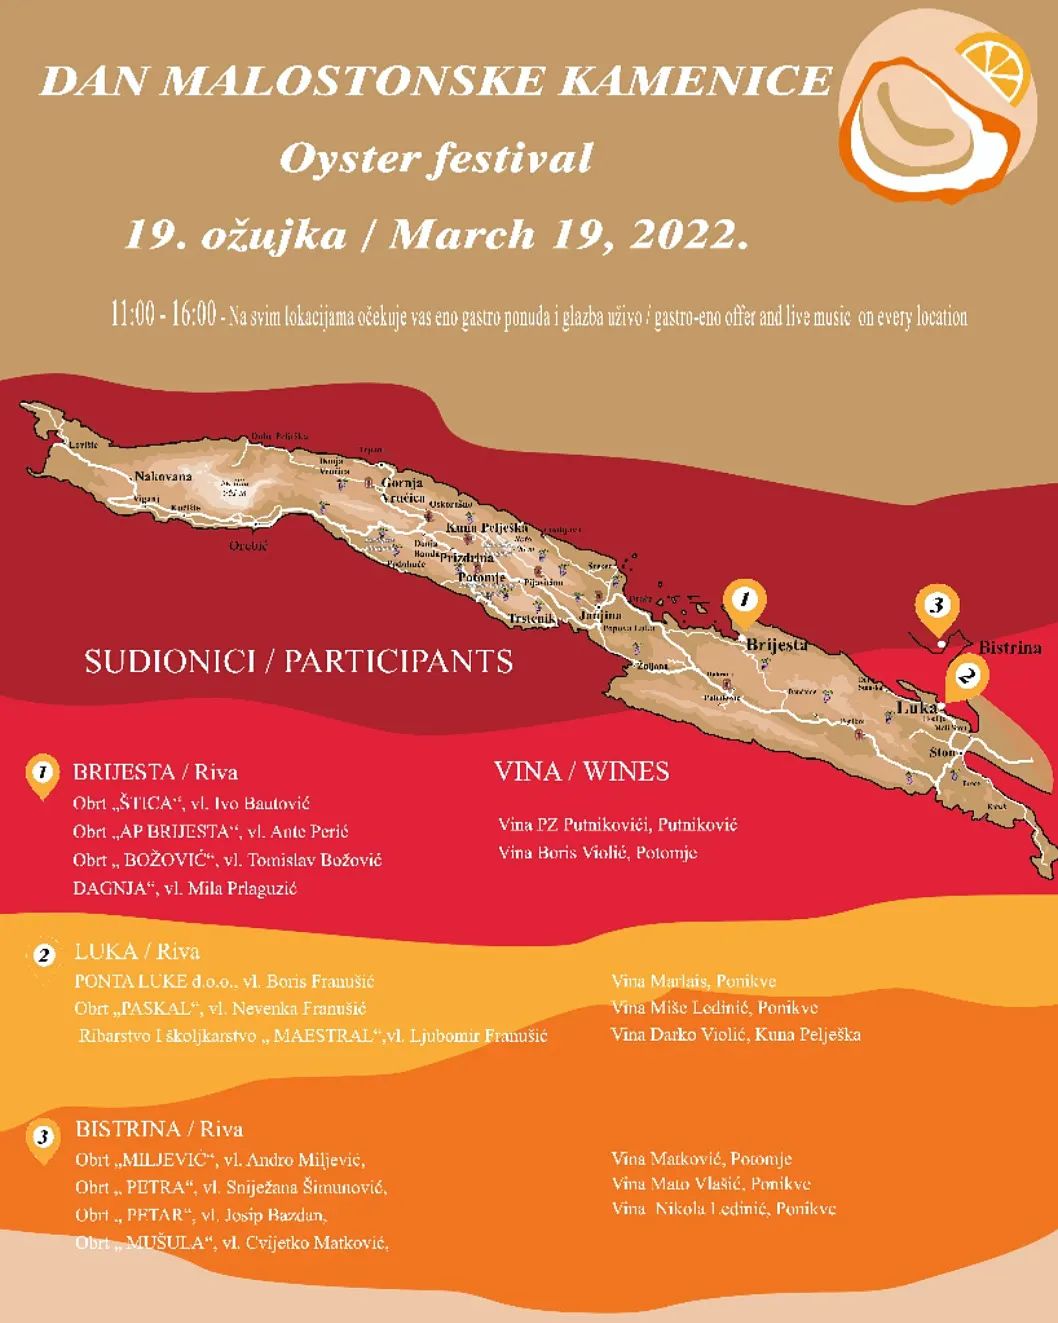 Traditional Oyster Festival in Mali Ston returns 